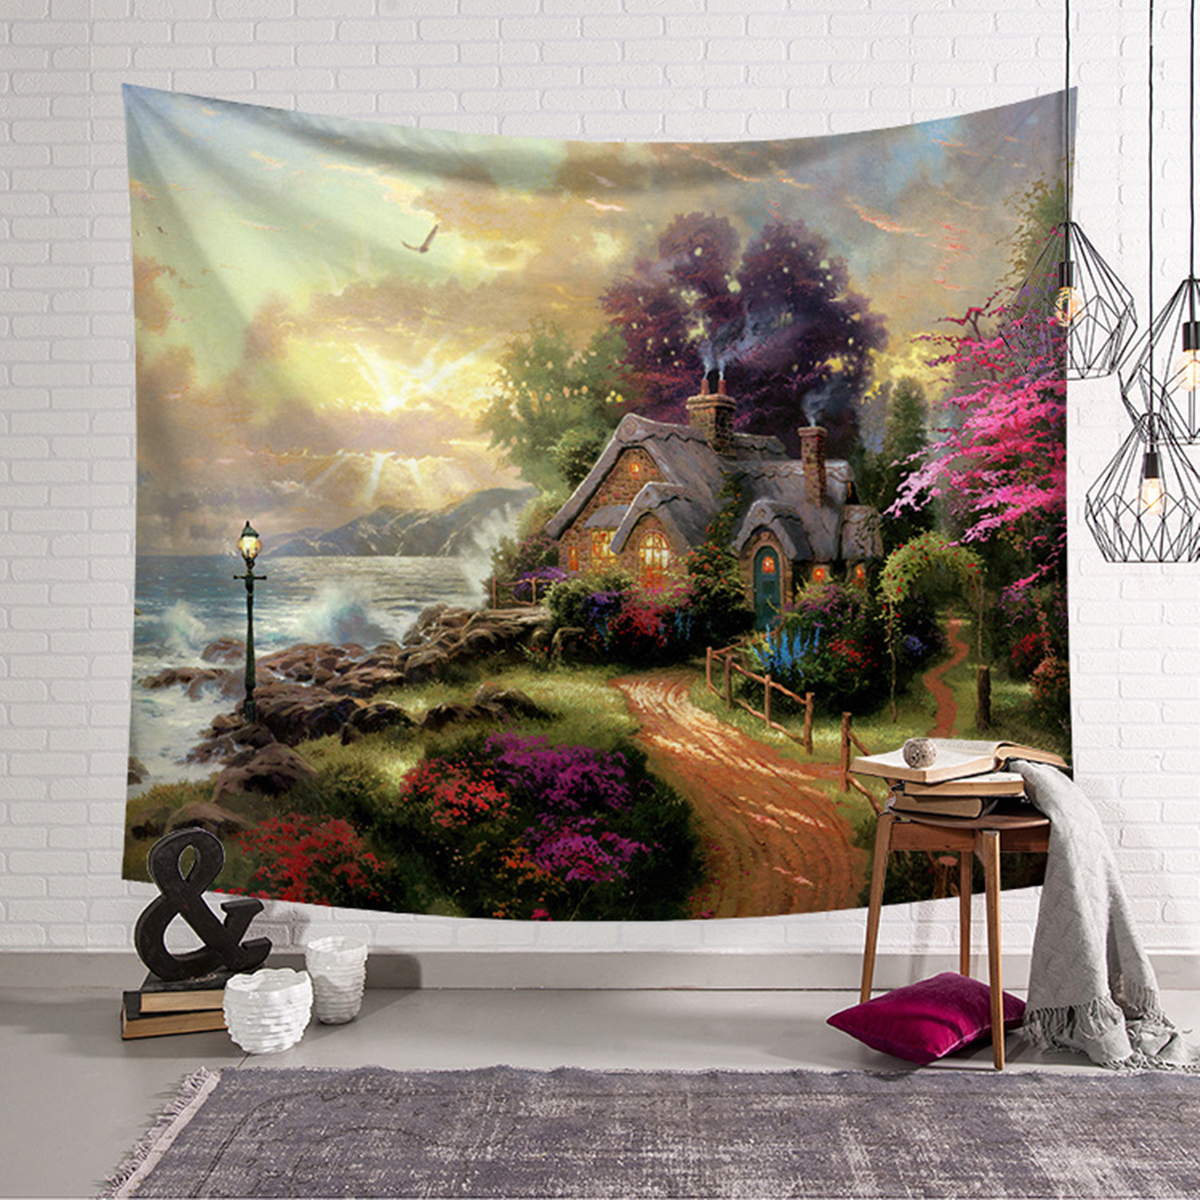 Fairy-Forest-Hanging-Wall-Tapestry-Bohemian-Hippie-Throw-Bedspread-Home-Decorations-1309251-3